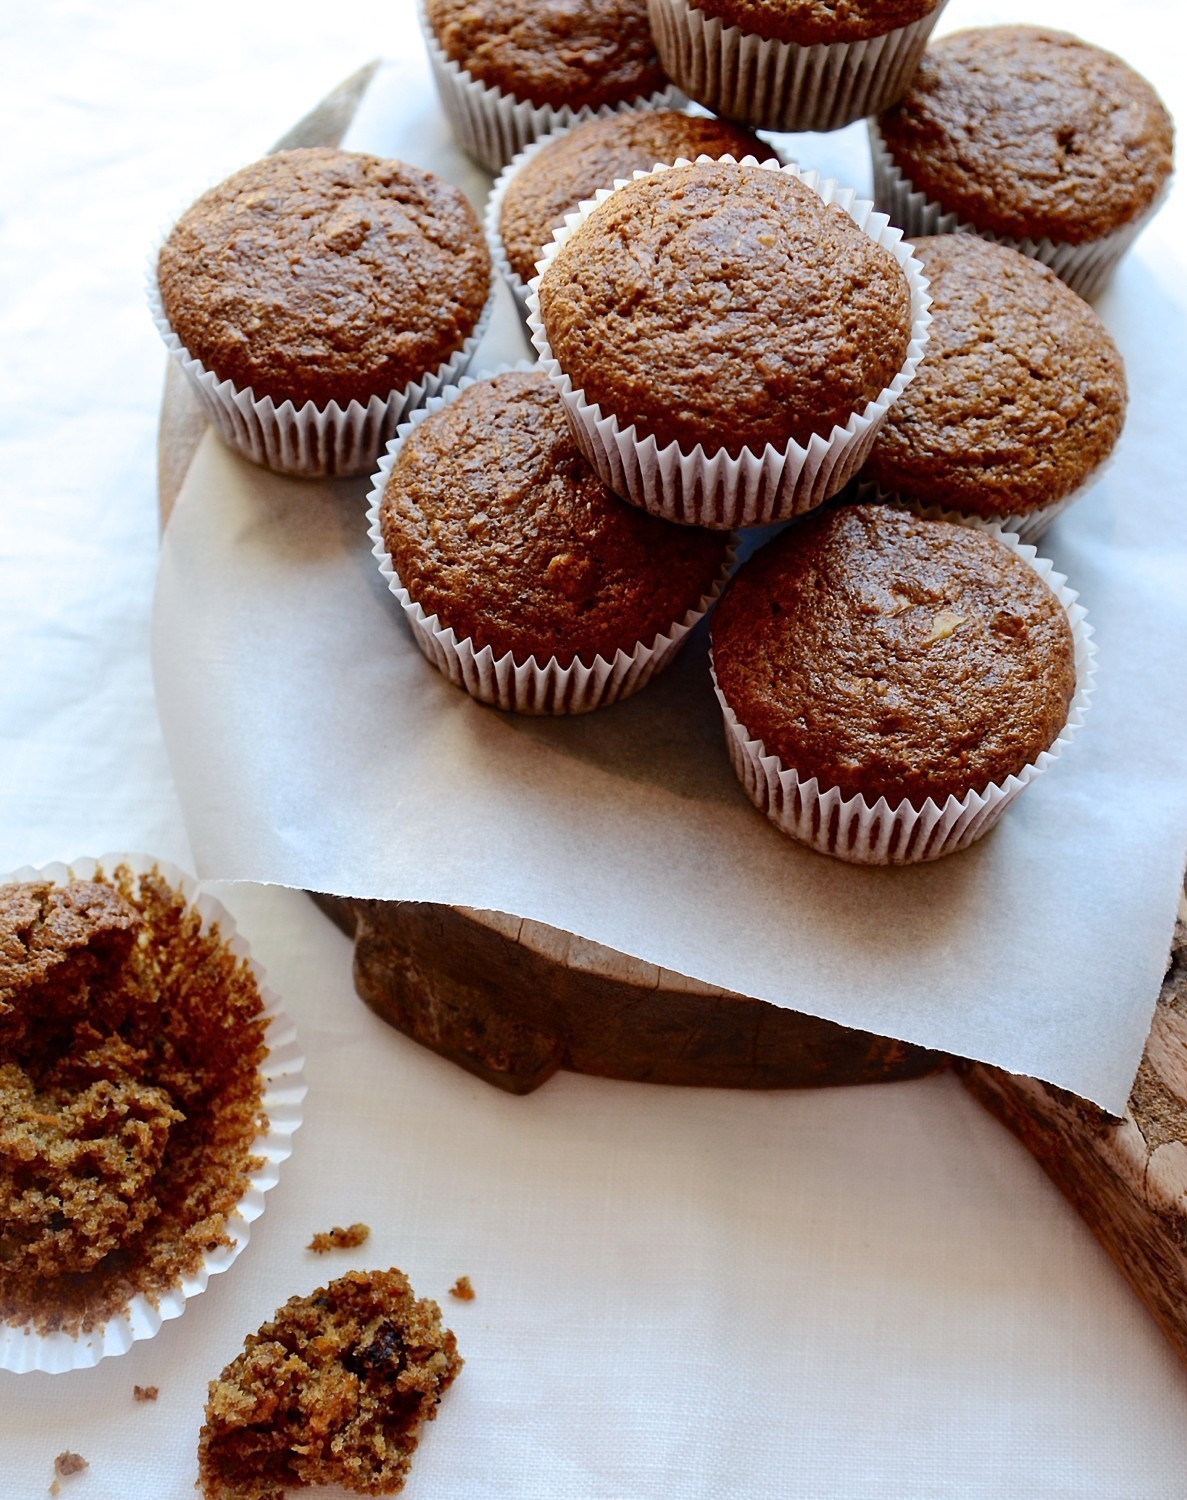 Carrot and apple bran muffins